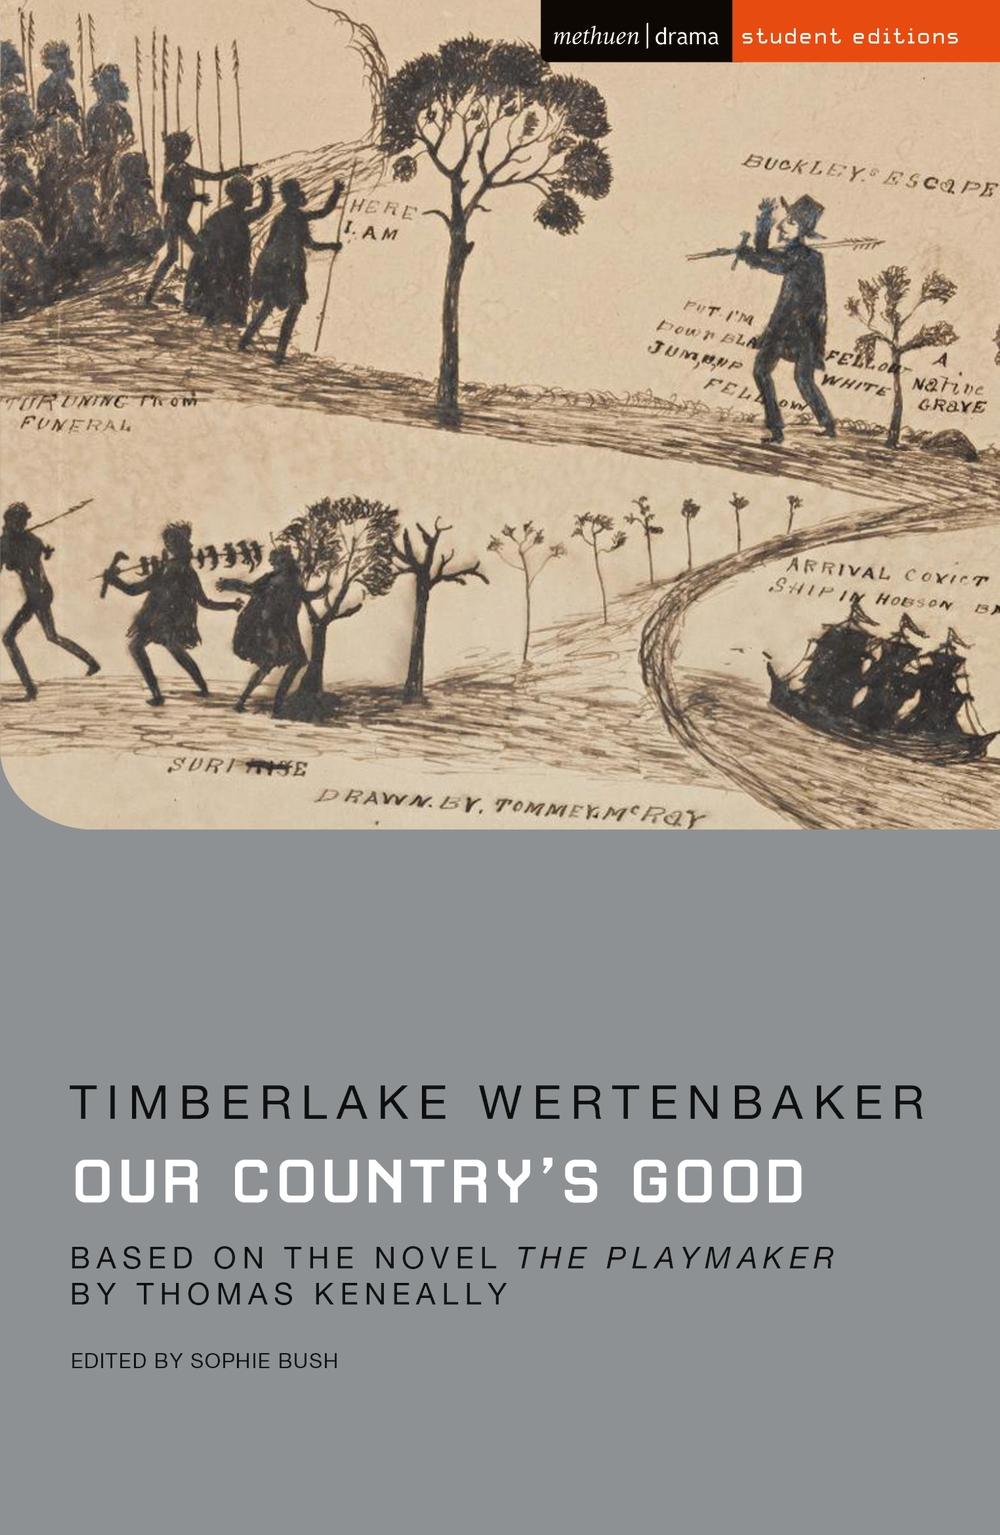 Our Country's Good - Timberlake Wertenbaker